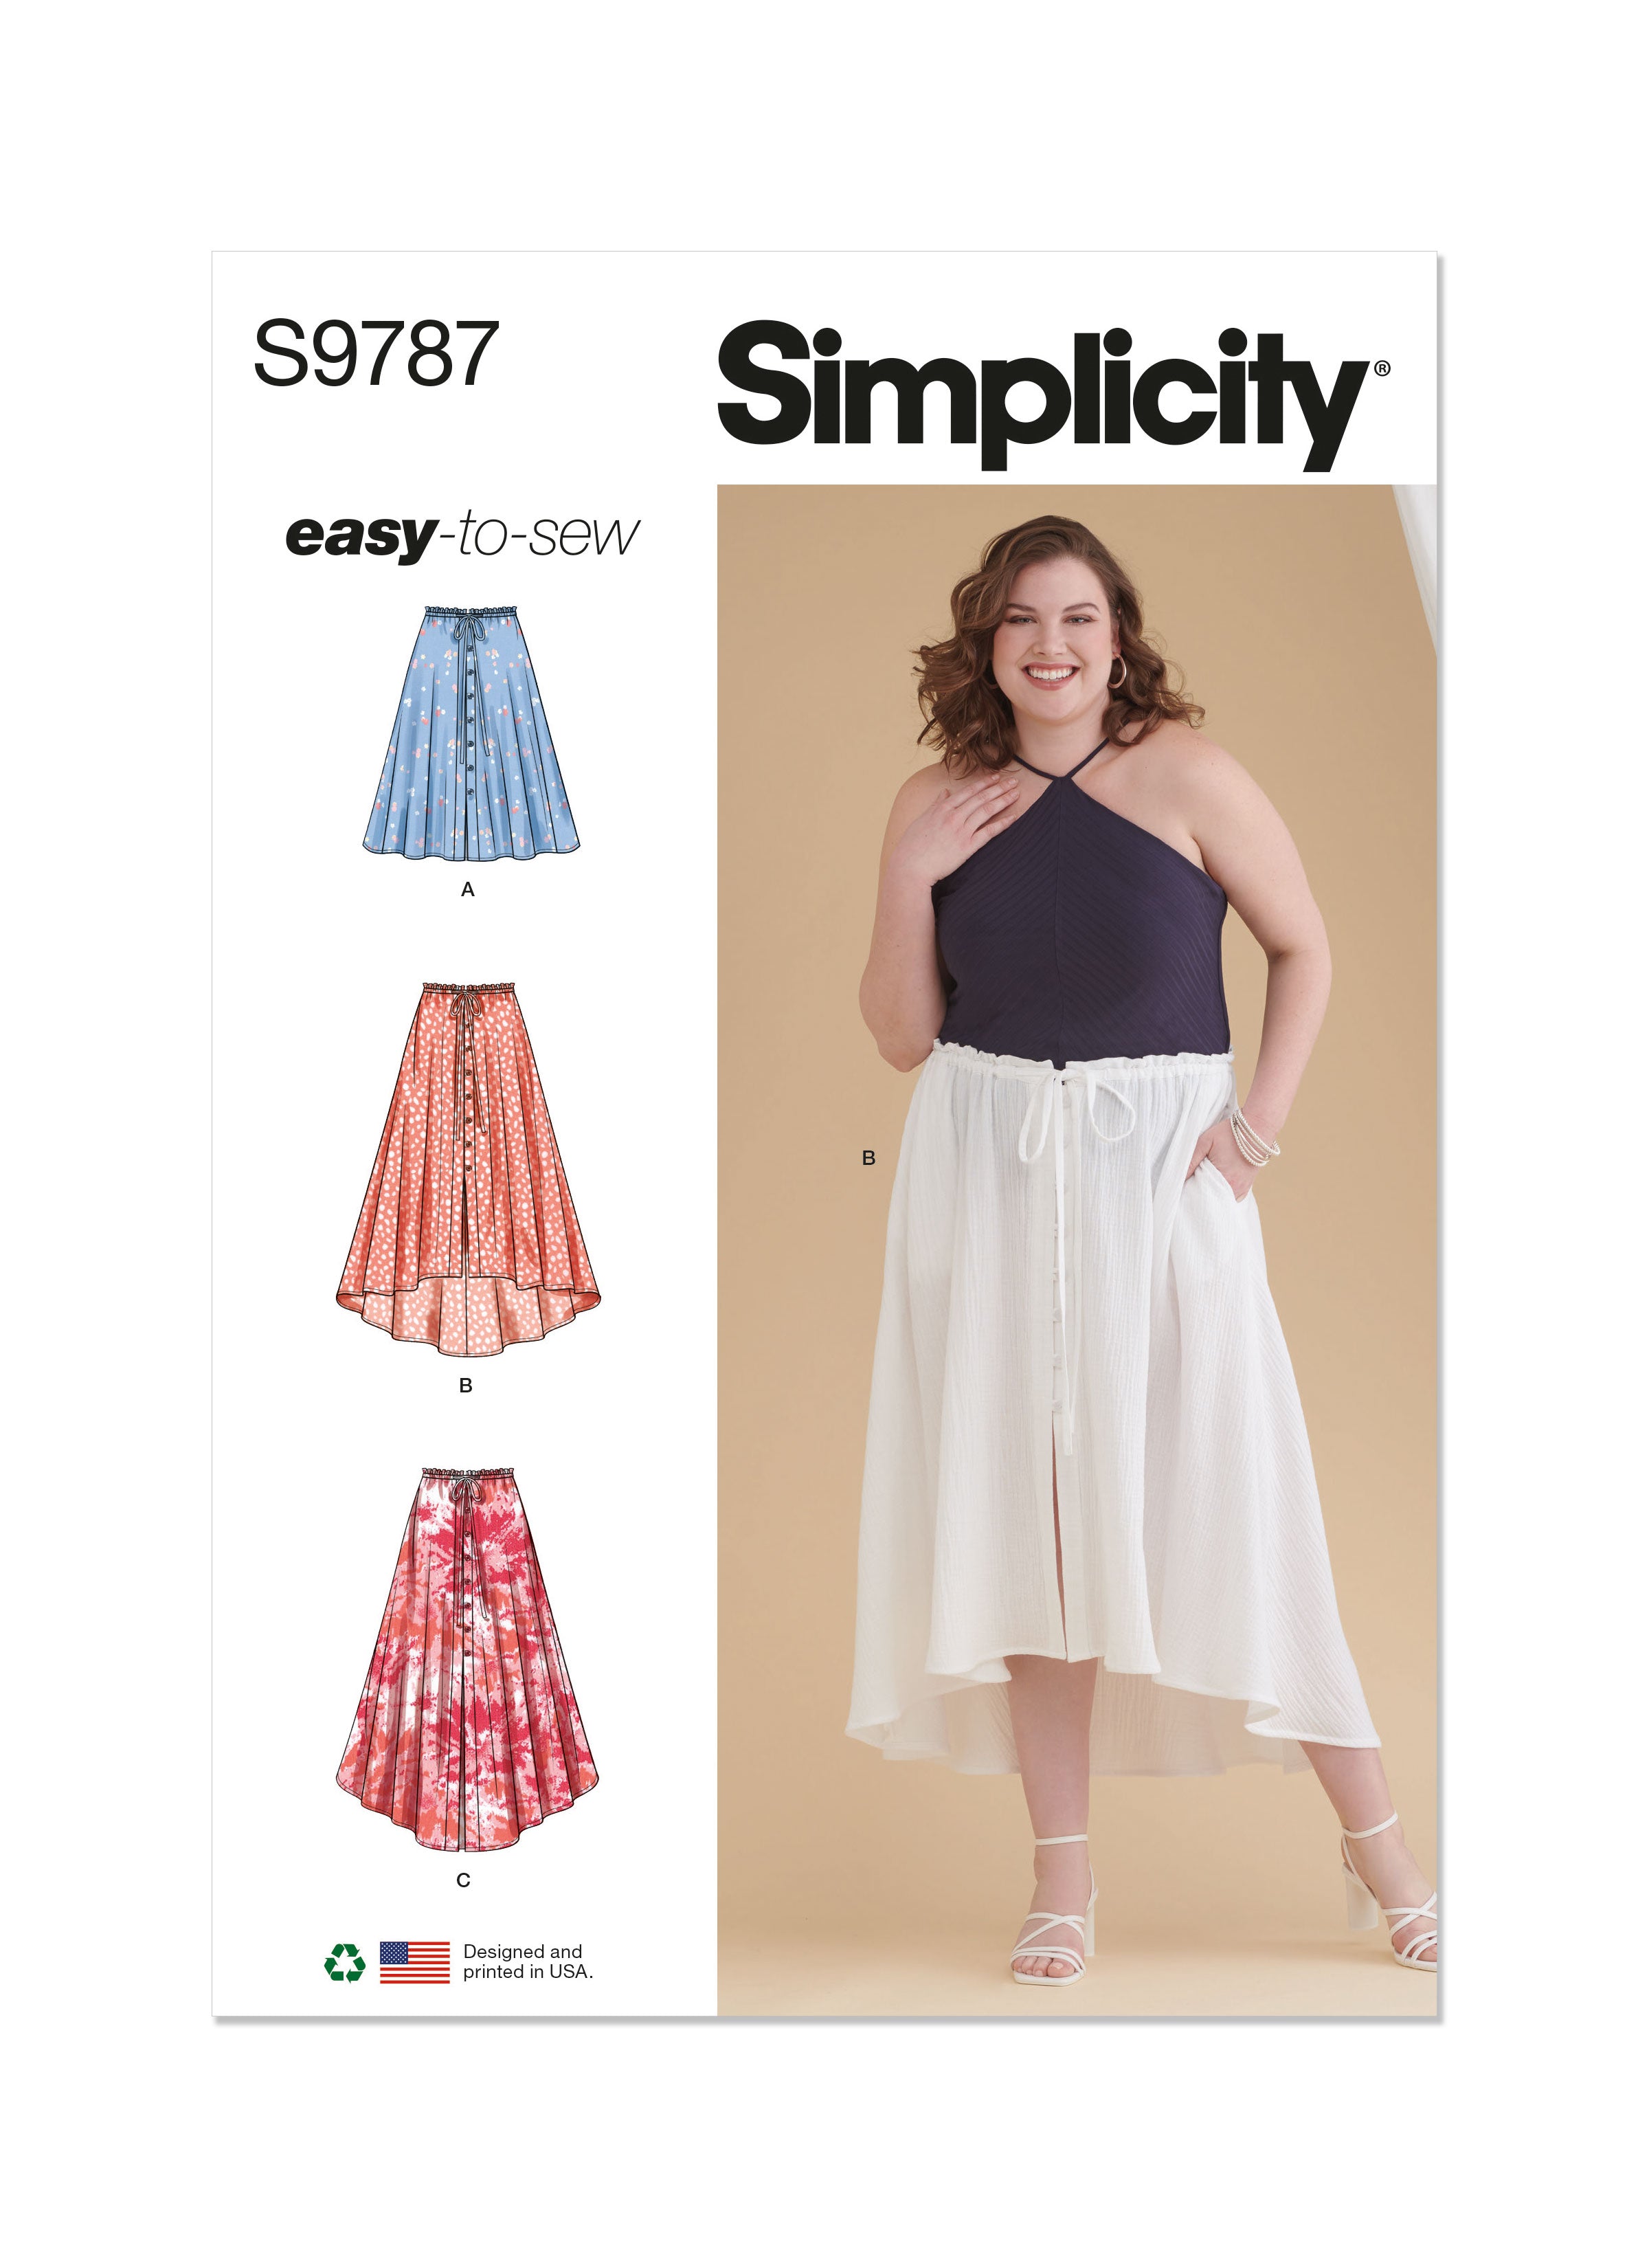 Simplicity sewing pattern 9787 Women's Skirt With Hemline Variations from Jaycotts Sewing Supplies